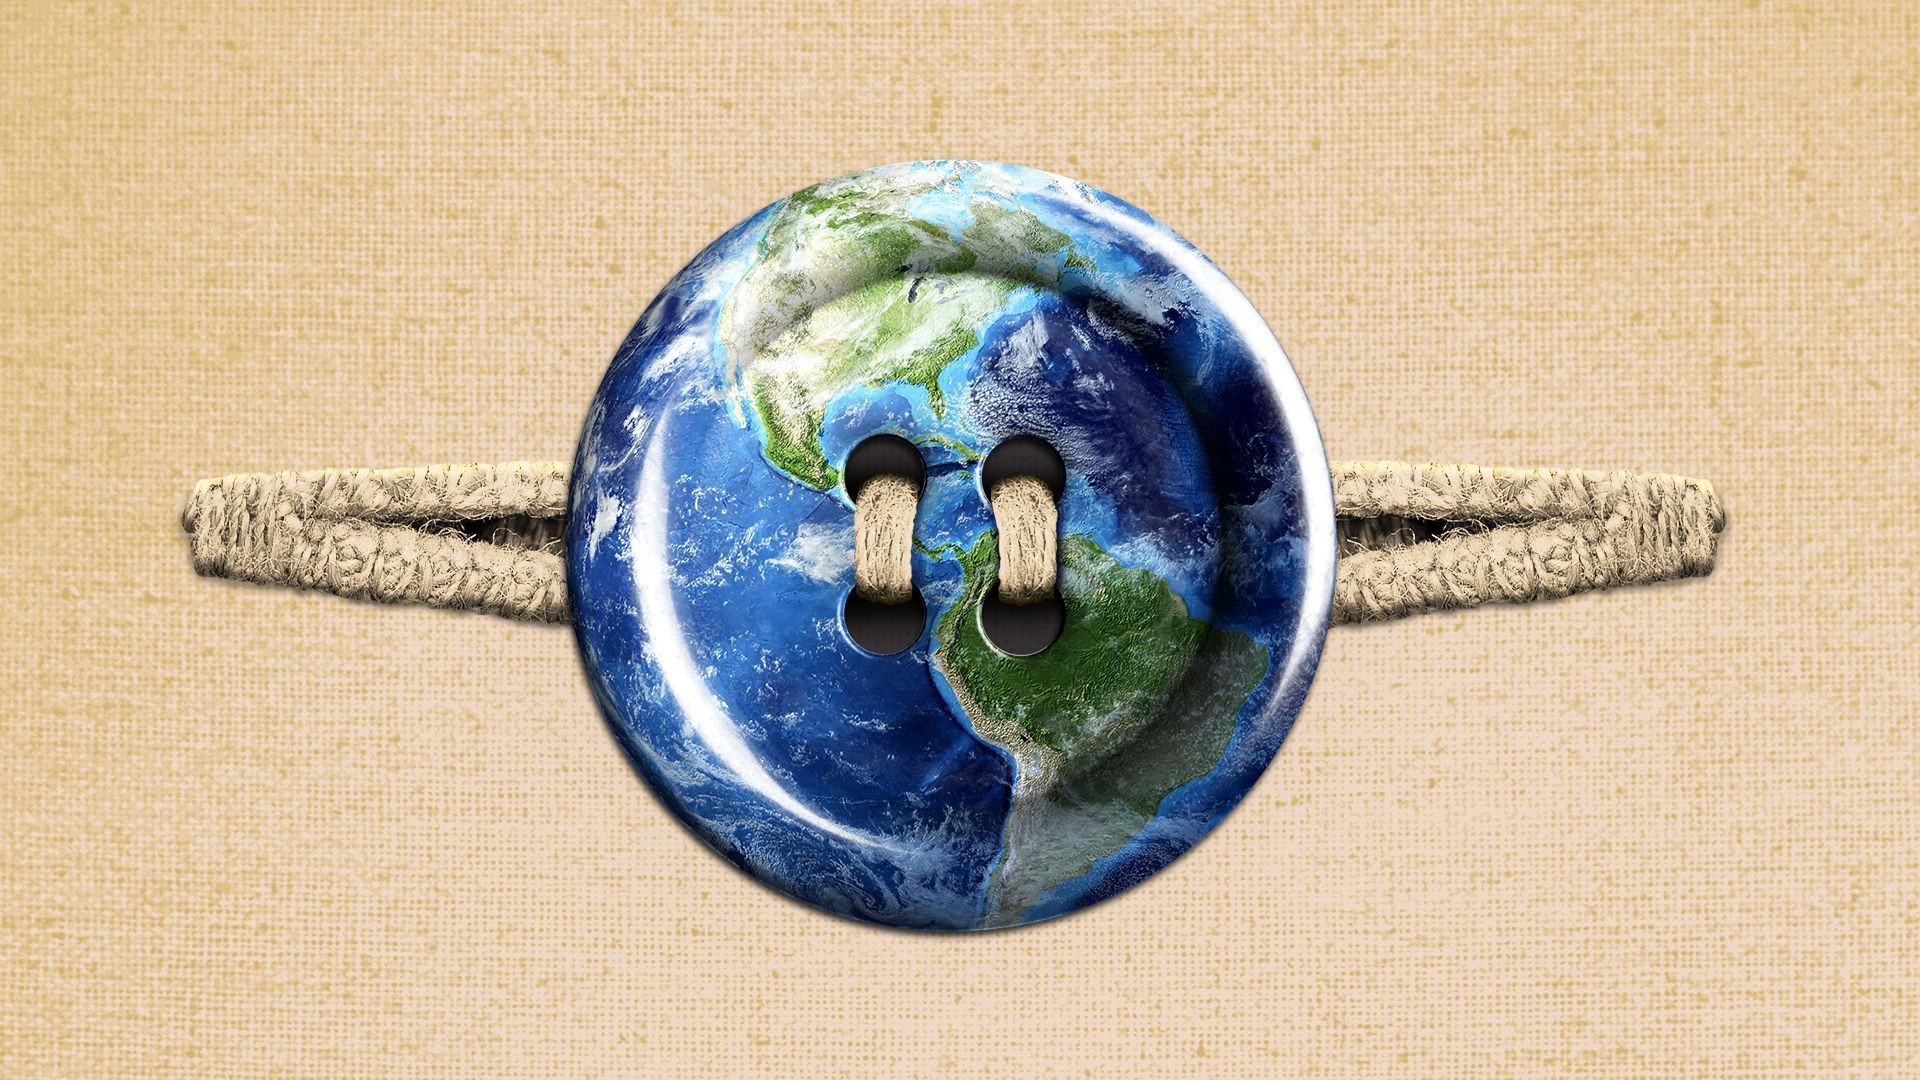 Illustration of a shirt button in the shape of the earth